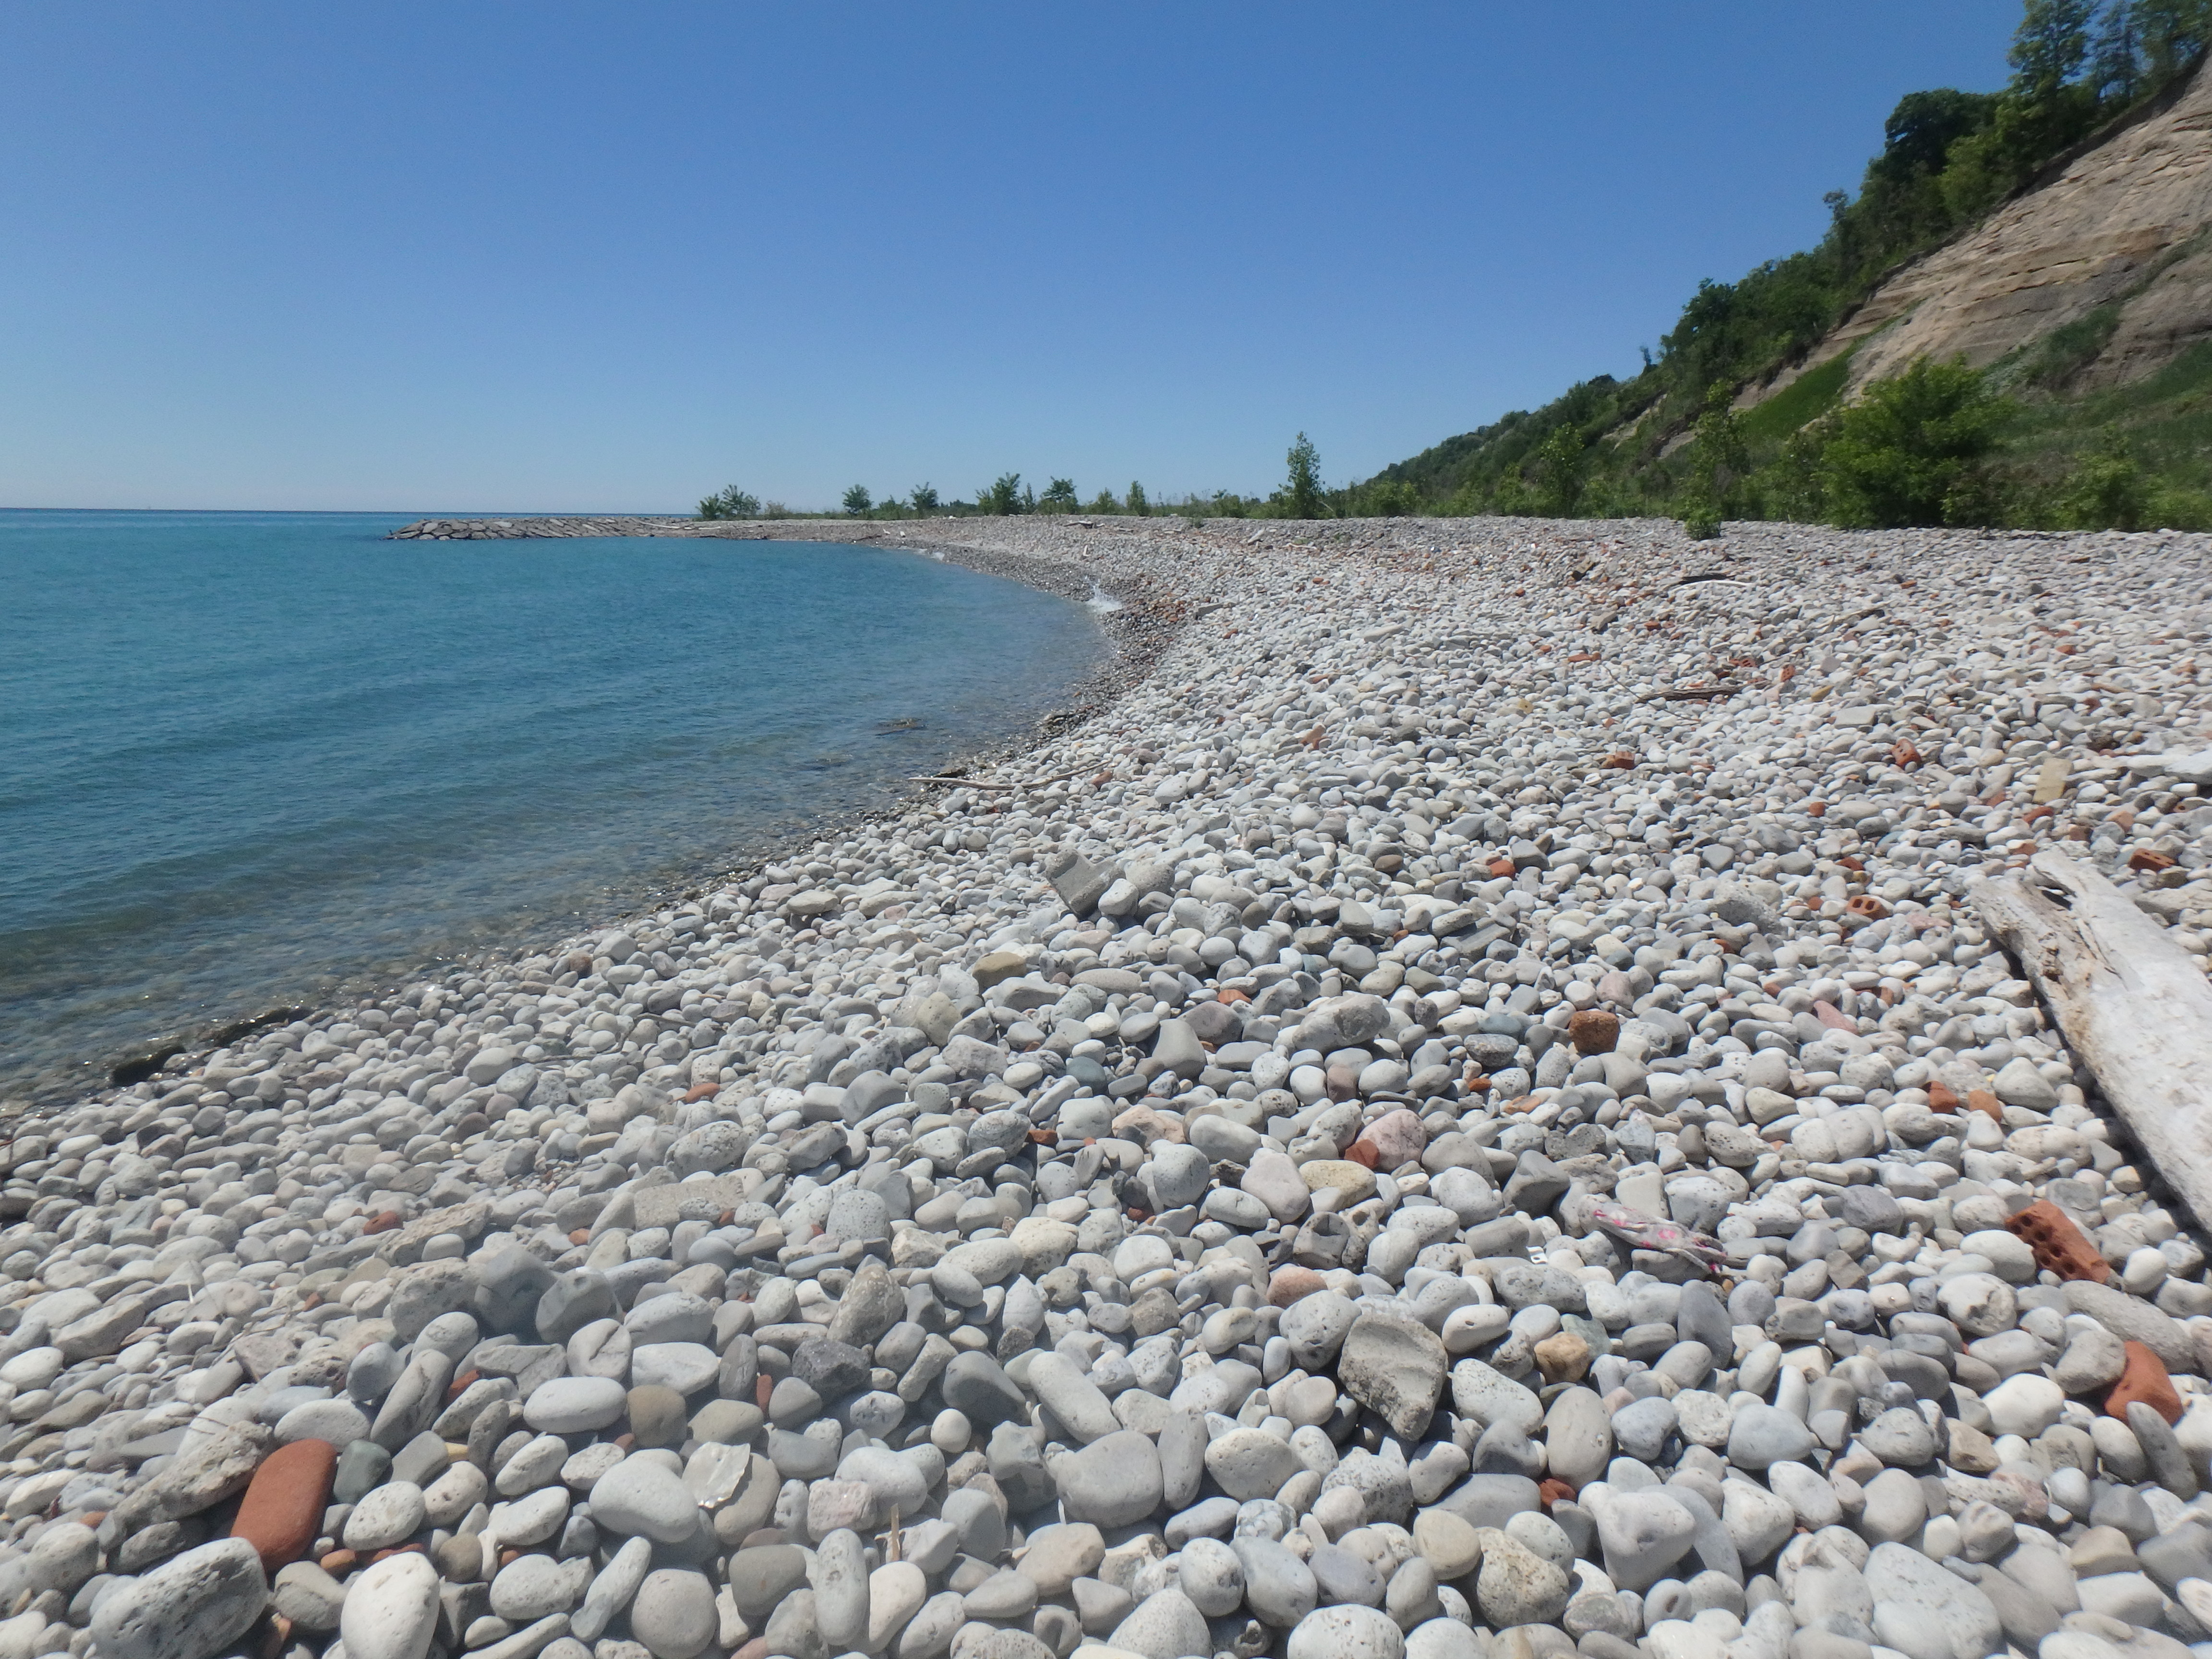 Example of a cobble beach. Source: TRCA, 2018.